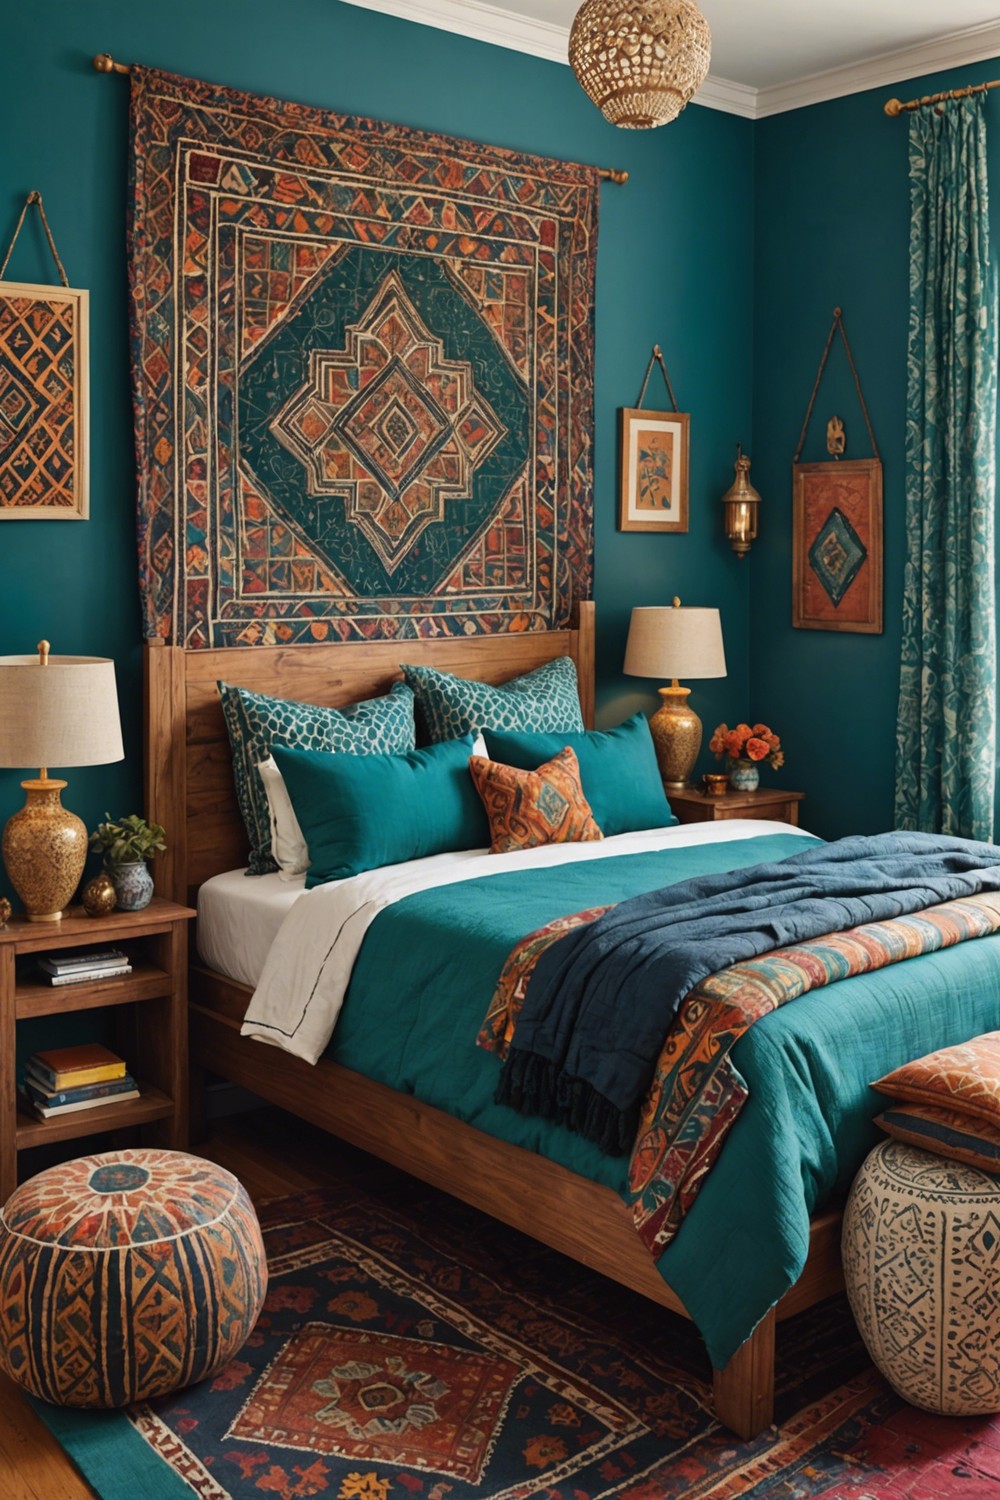 Boho Chic: Teal with Global Patterns